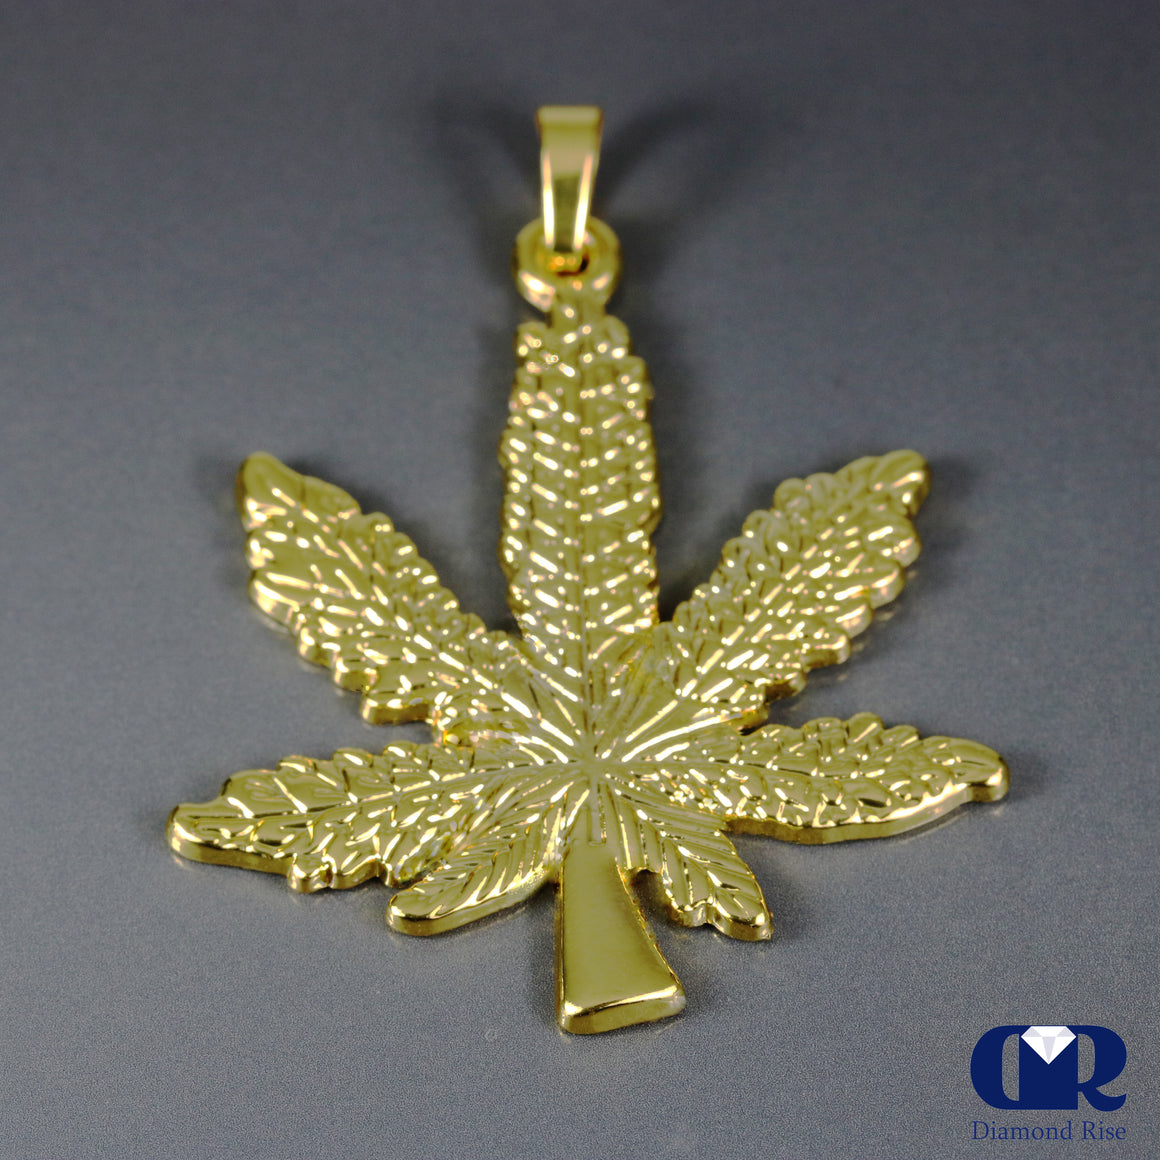 Solid 14K Yellow Gold leaf Pendant Necklace - Diamond Rise Jewelry